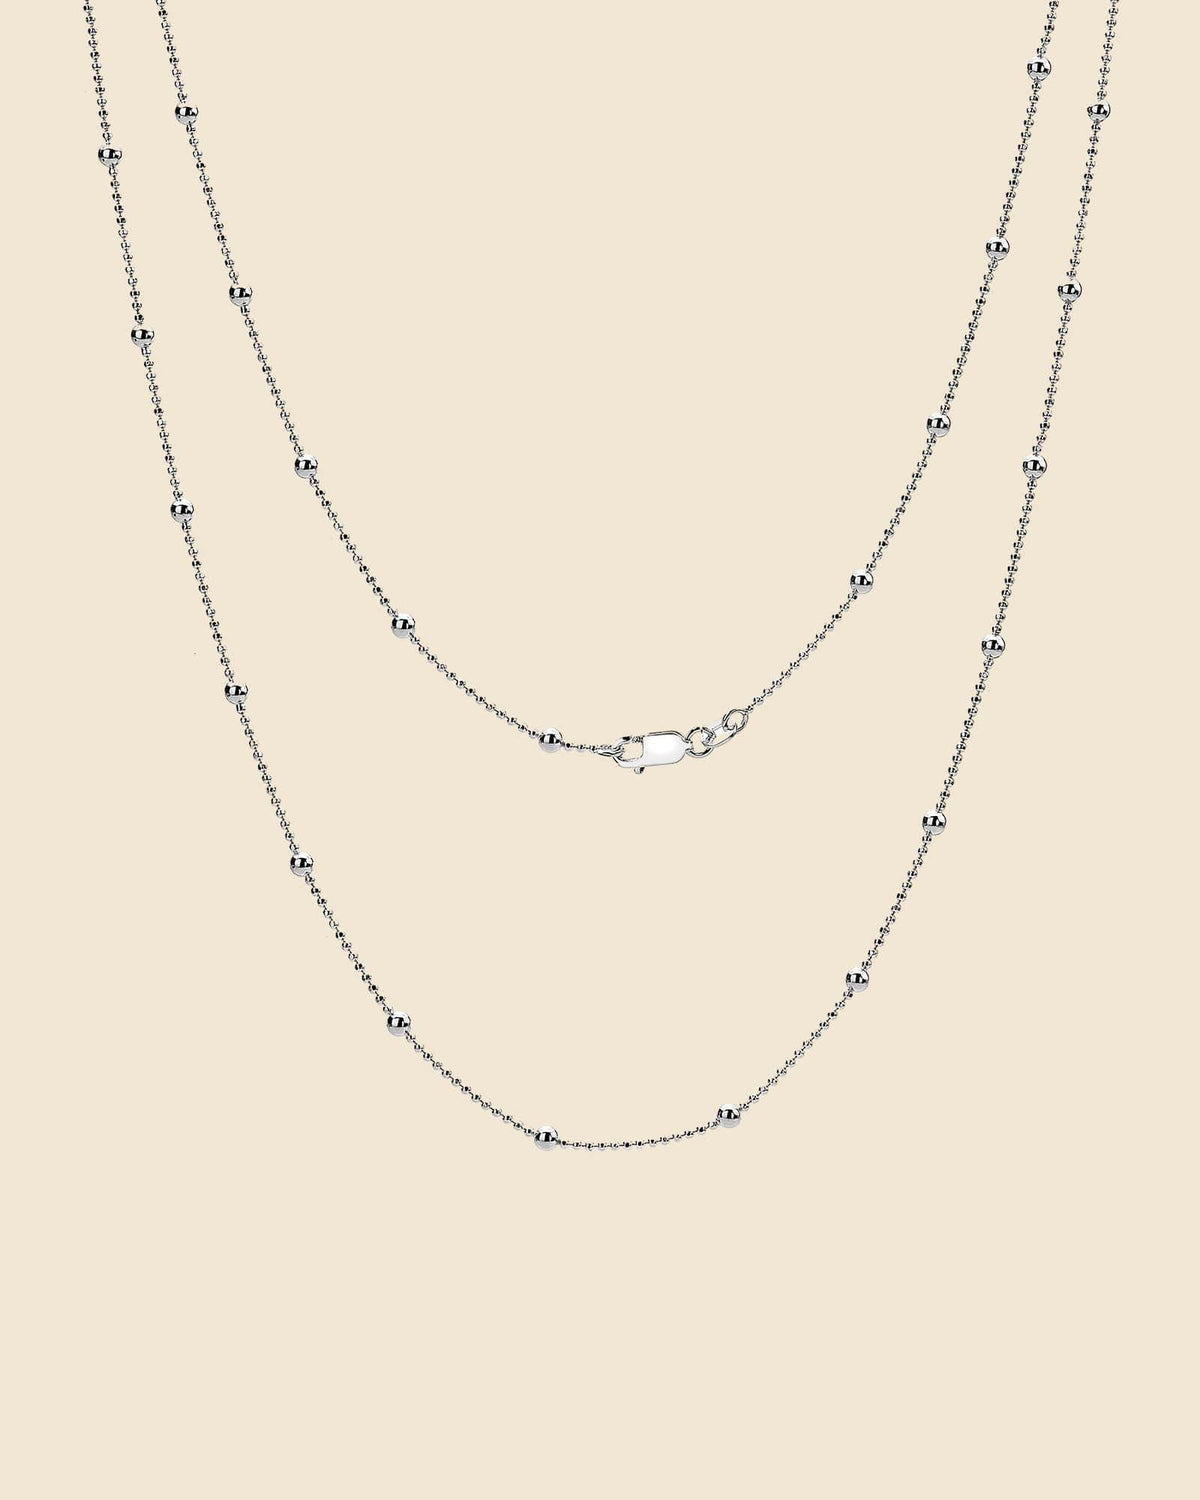 80cm Sterling Silver Bobble Station Chain